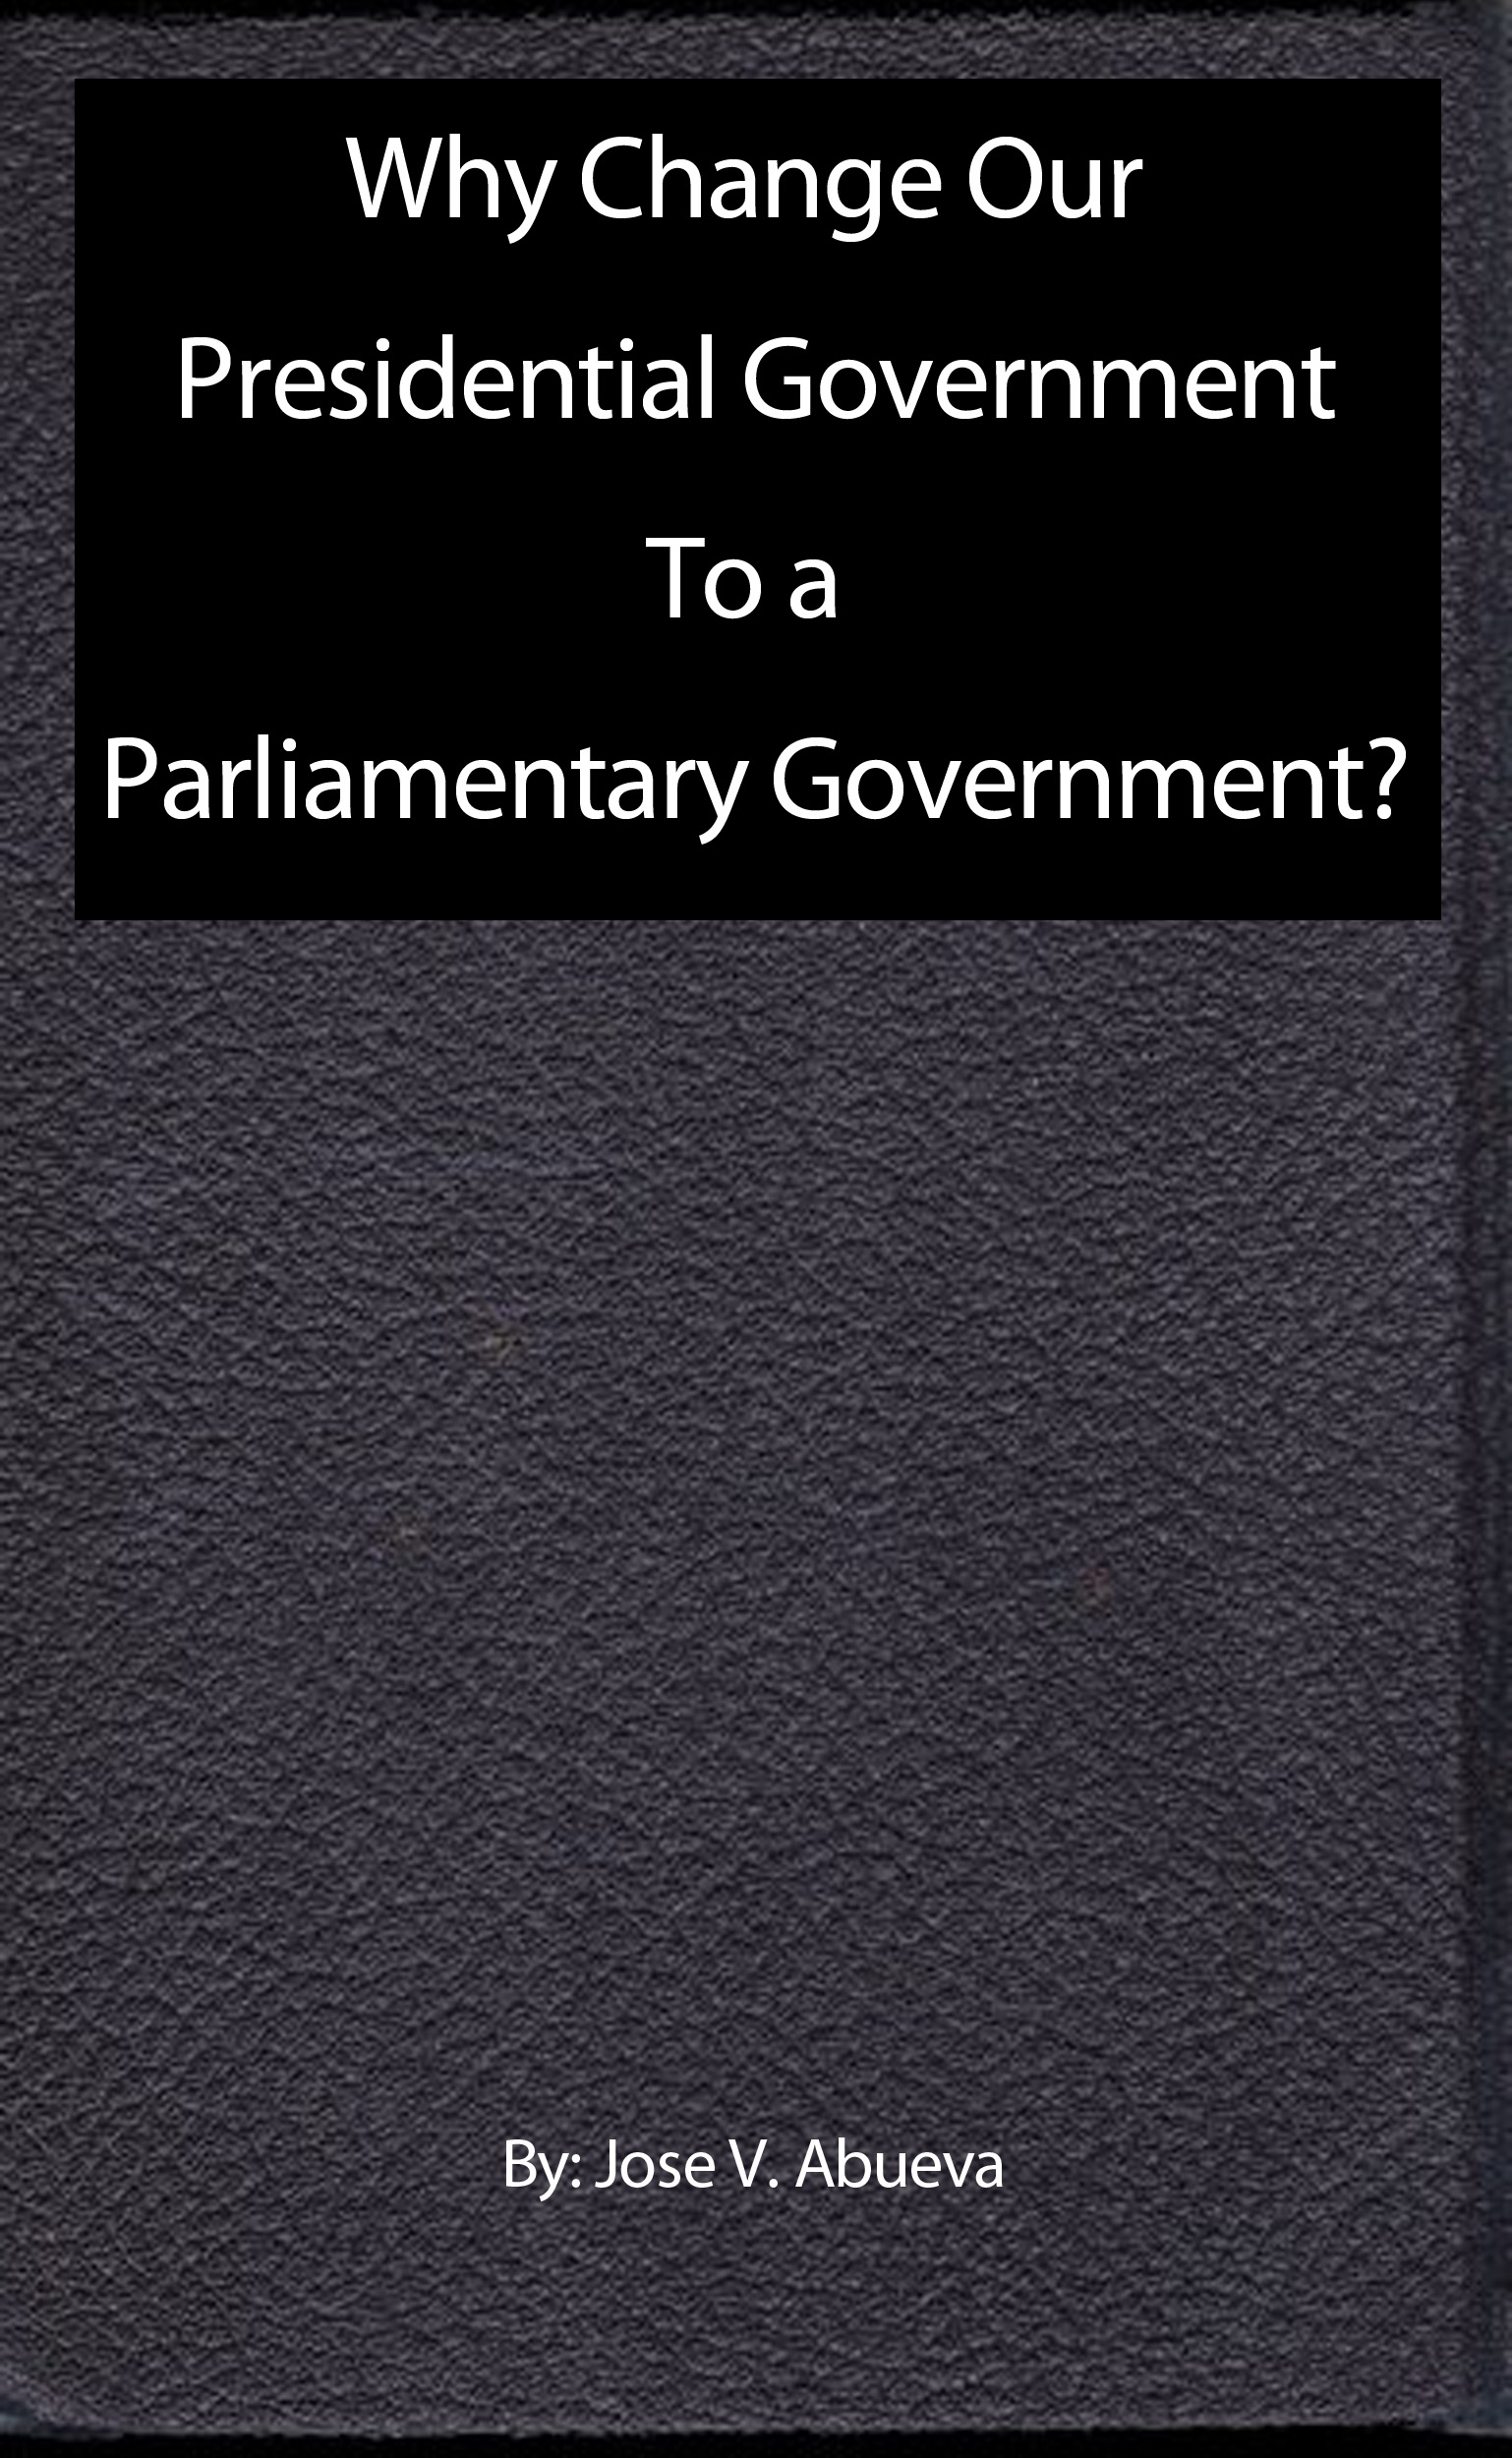 Why Change Our Presidential Government To a Parliamentary Government?